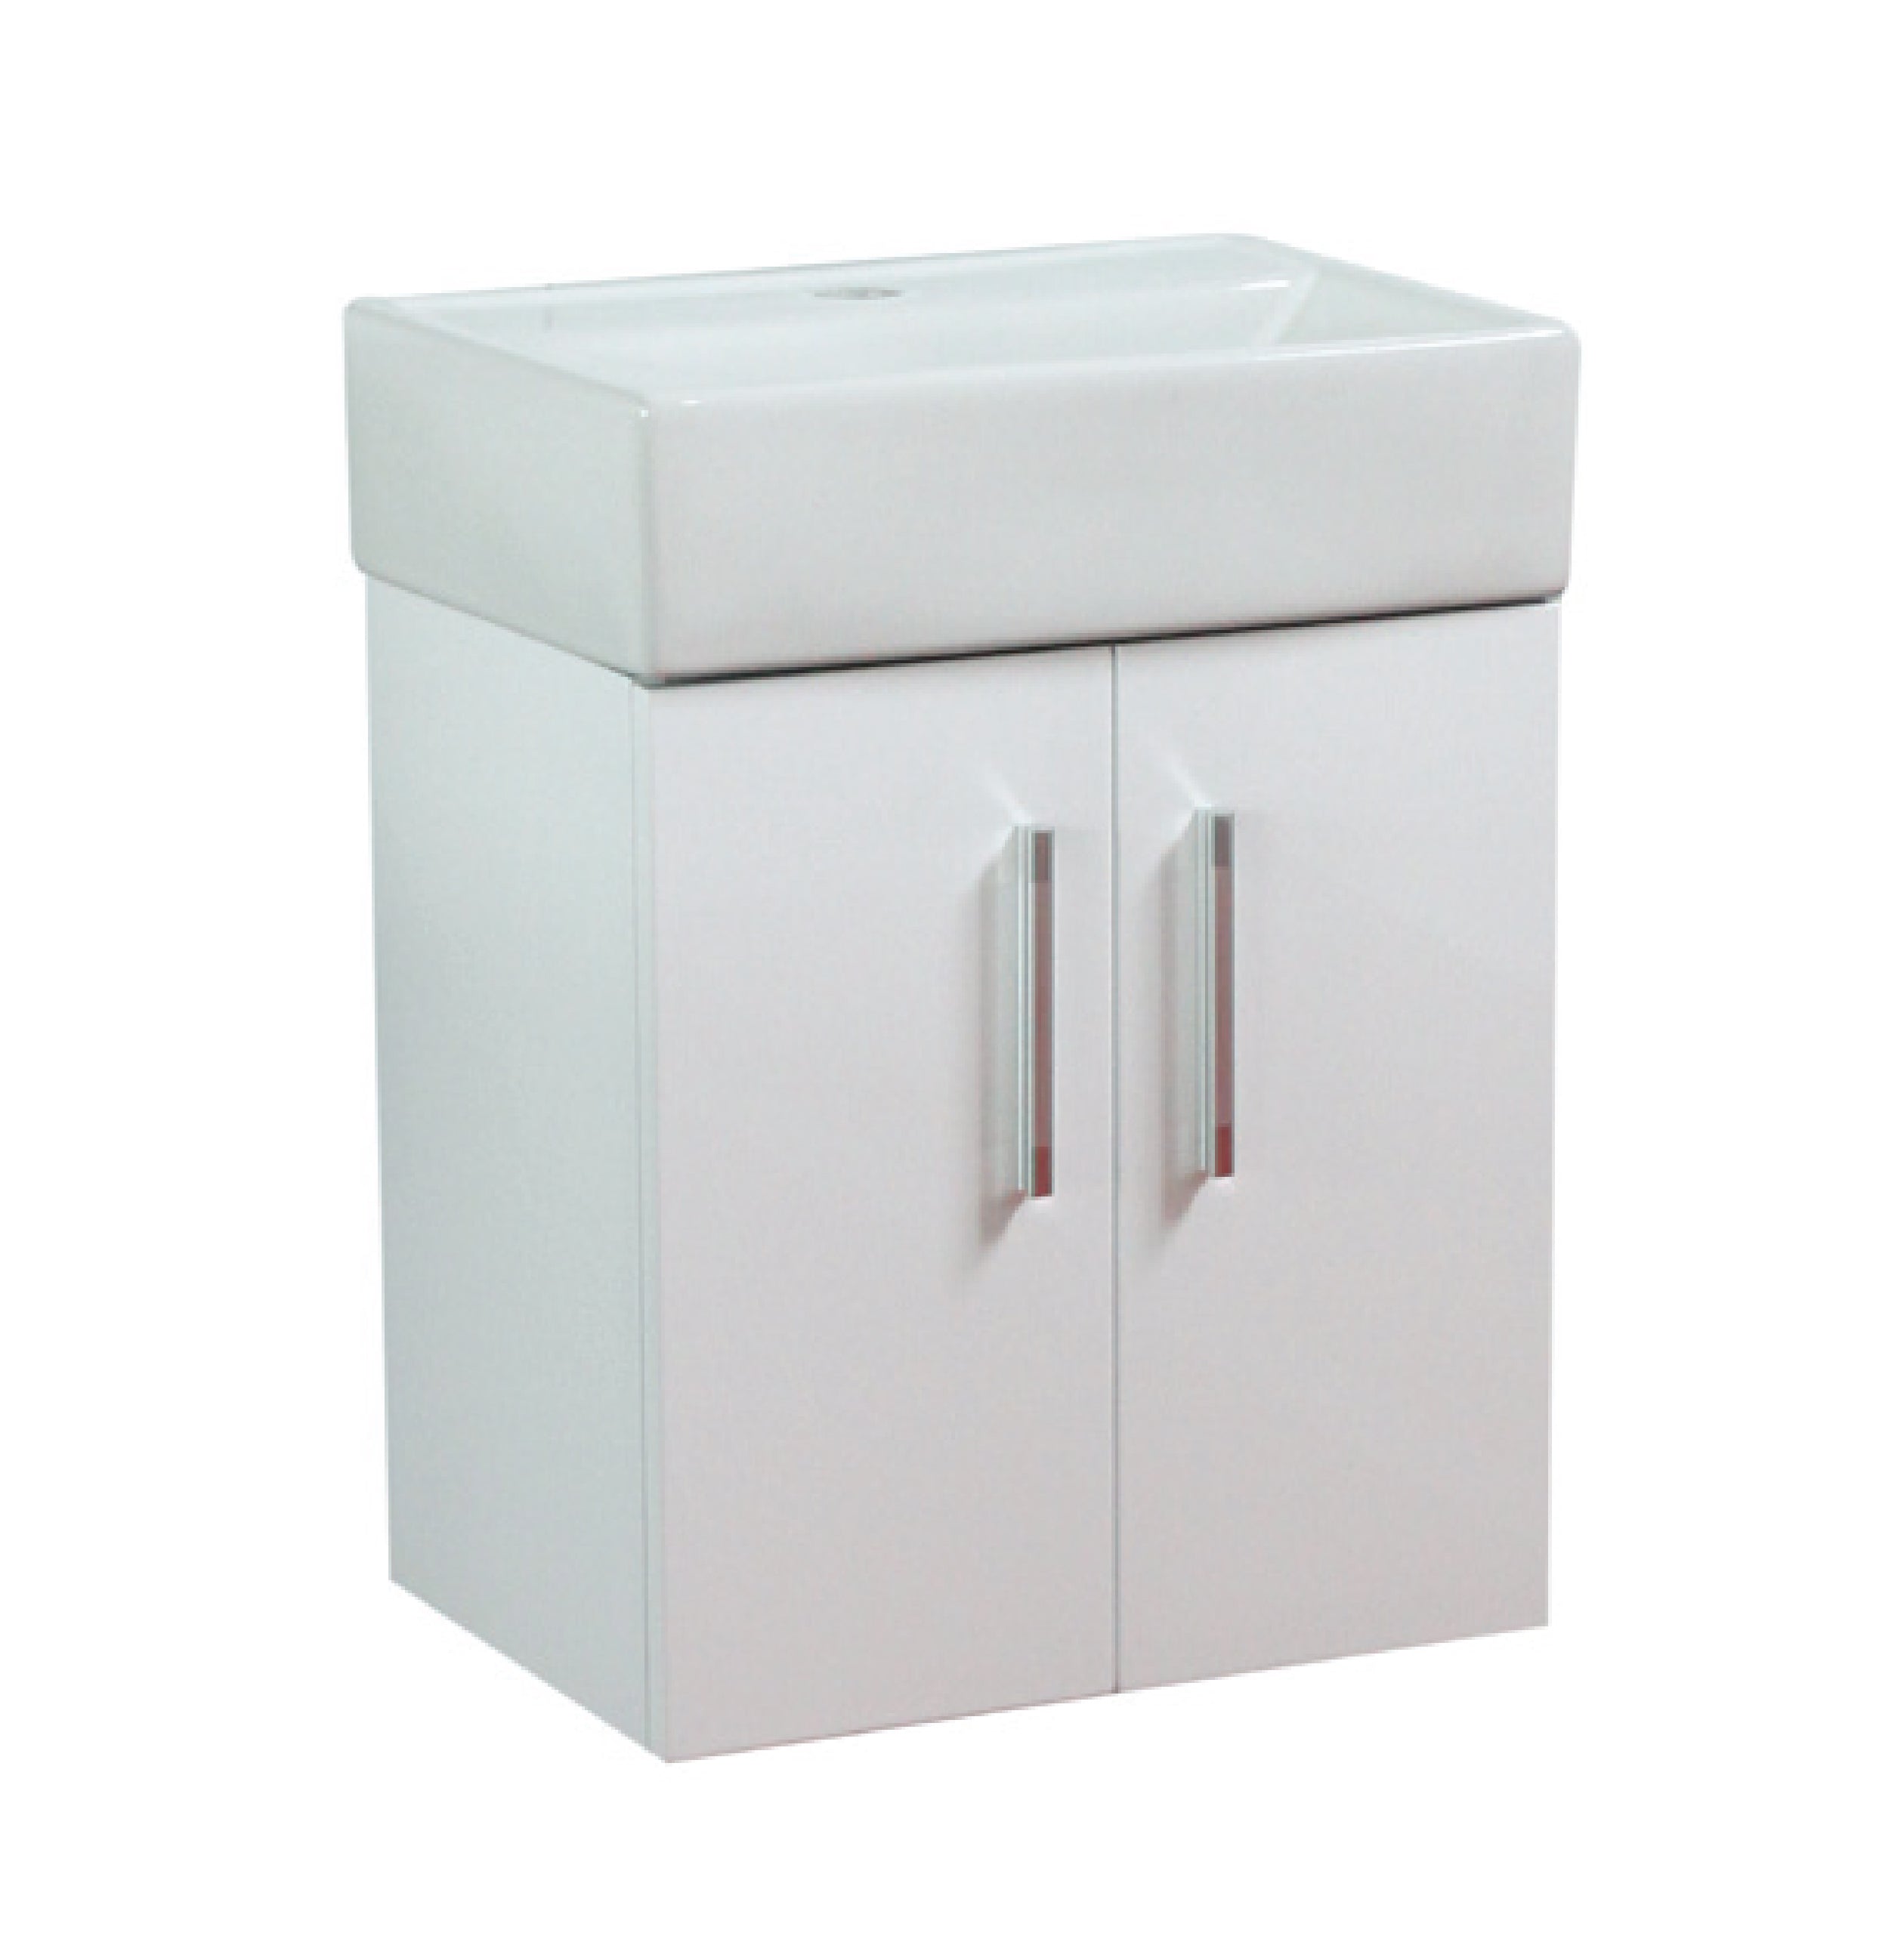 Glossy Floor Standing Bathroom Storage Cabinet in White with Chrome Handles and Soft Close Doors